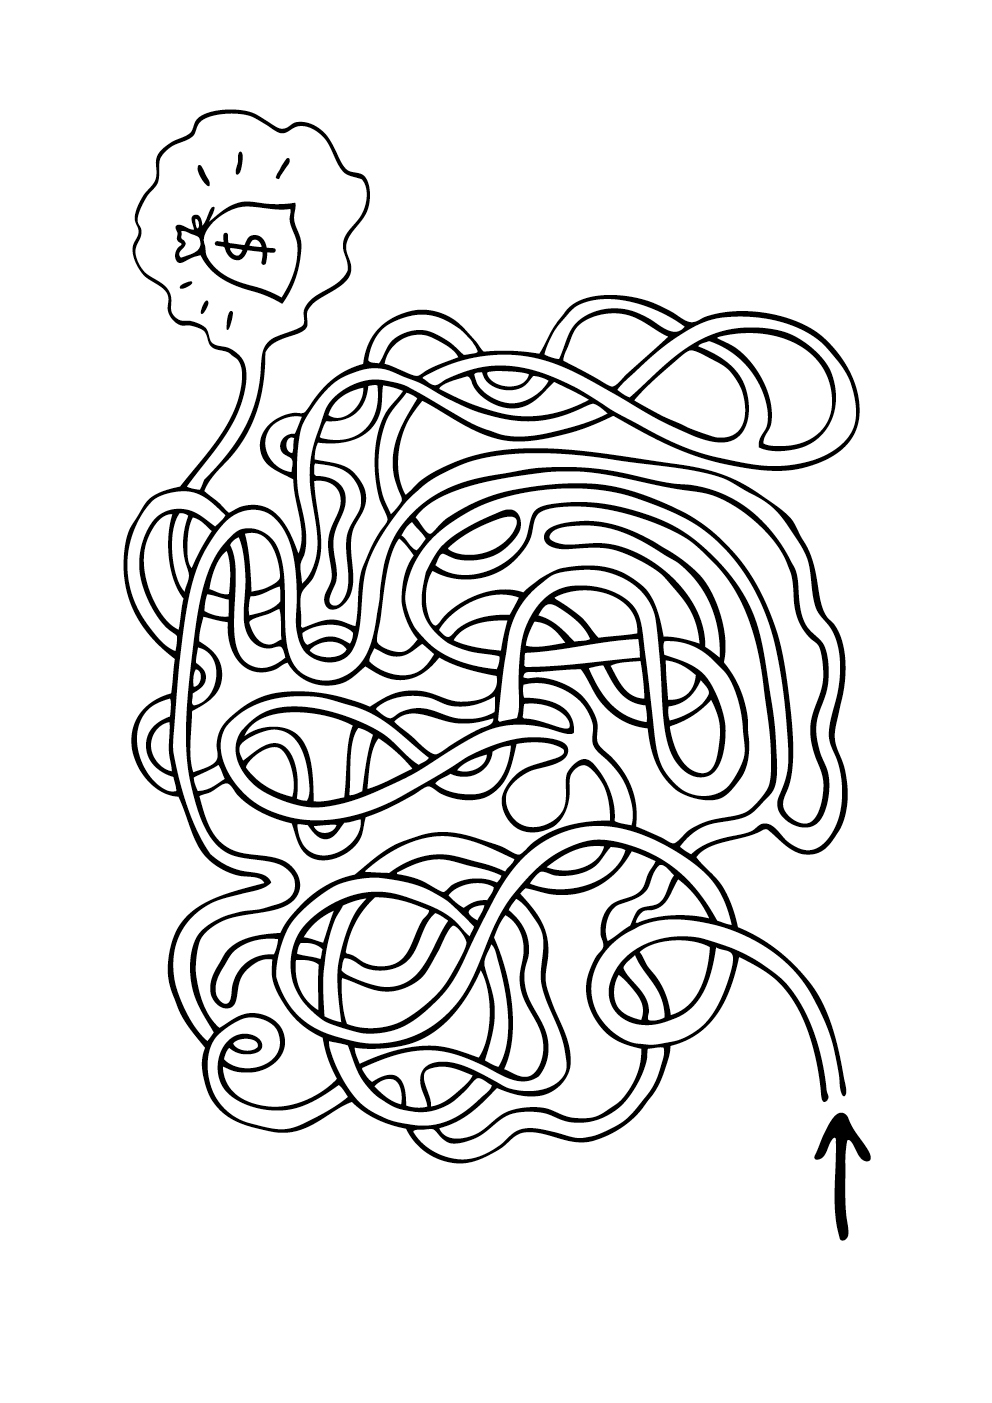 Get rich by coloring the right path through this maze